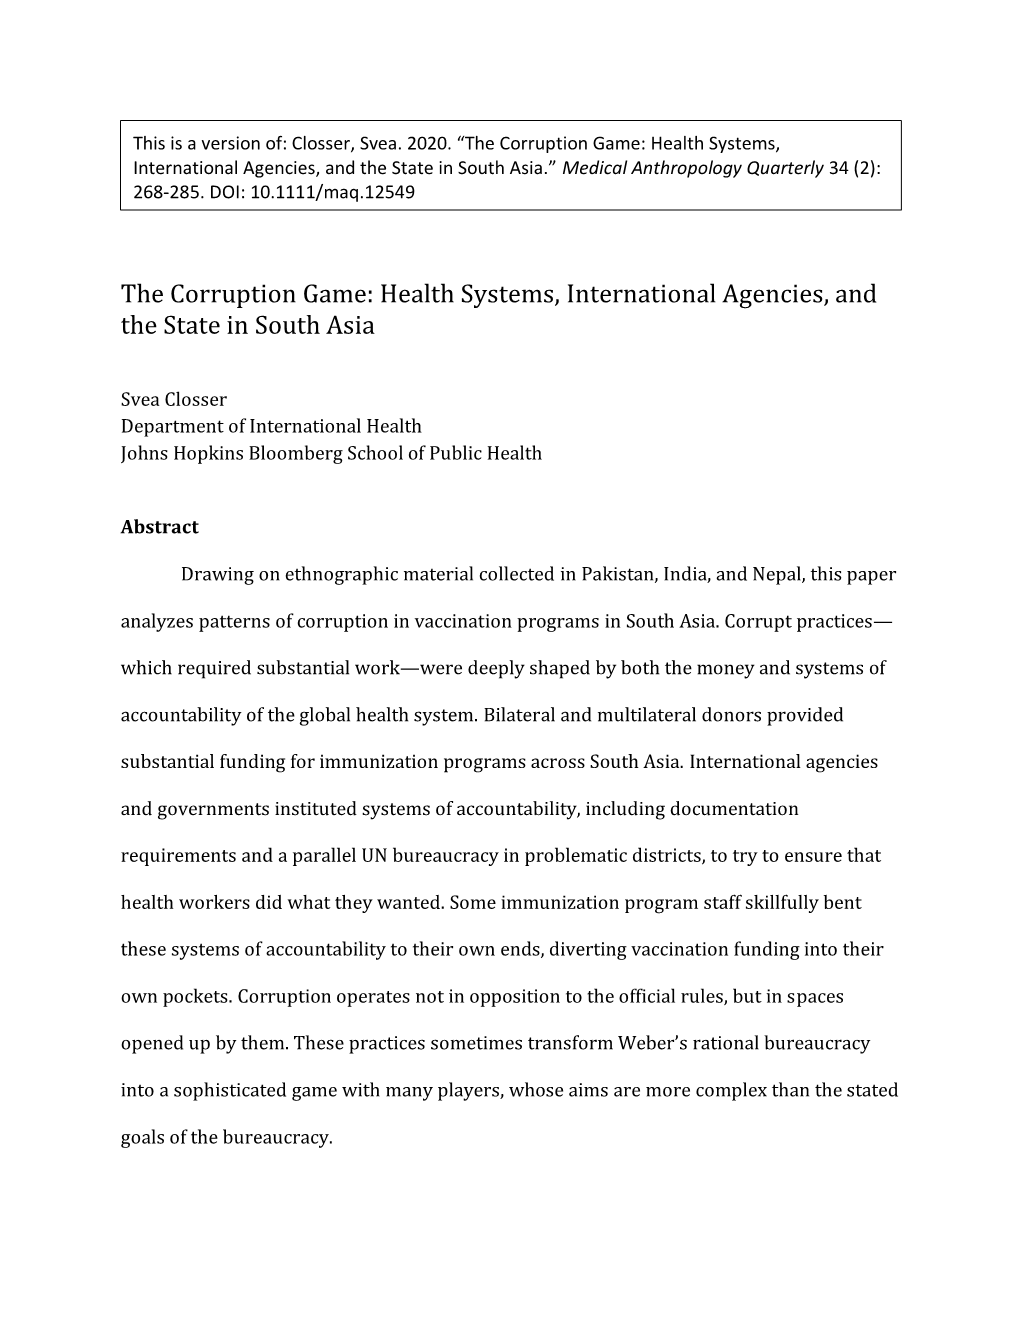 Health Systems, International Agencies, and the State in South Asia.” Medical Anthropology Quarterly 34 (2): 268-285